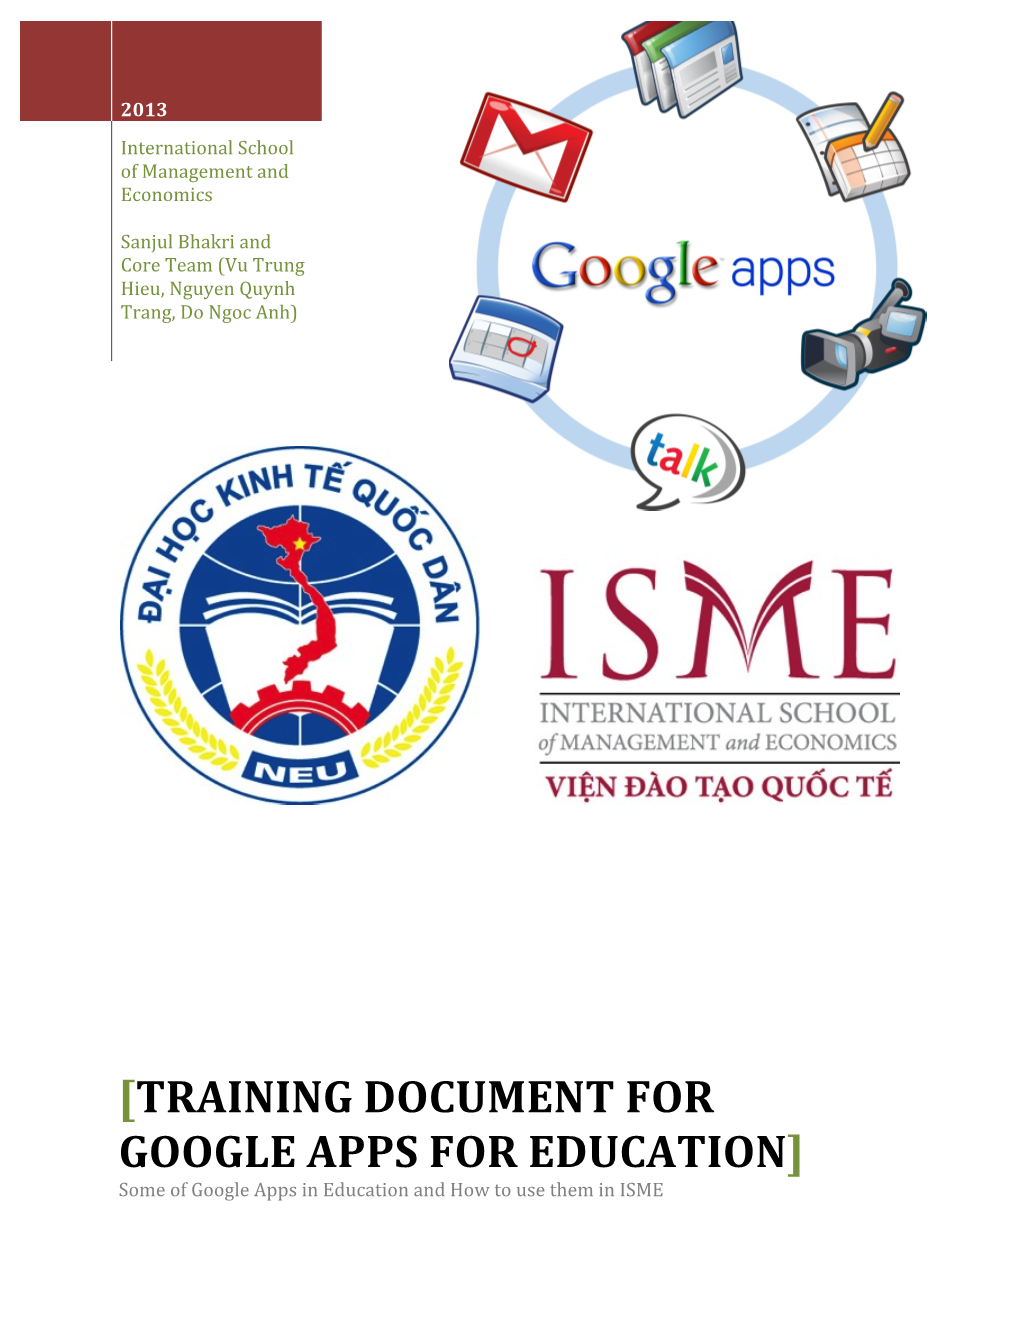 TRAINING DOCUMENT for GOOGLE APPS for EDUCATION] Some of Google Apps in Education and How to Use Them in ISME Contents 1